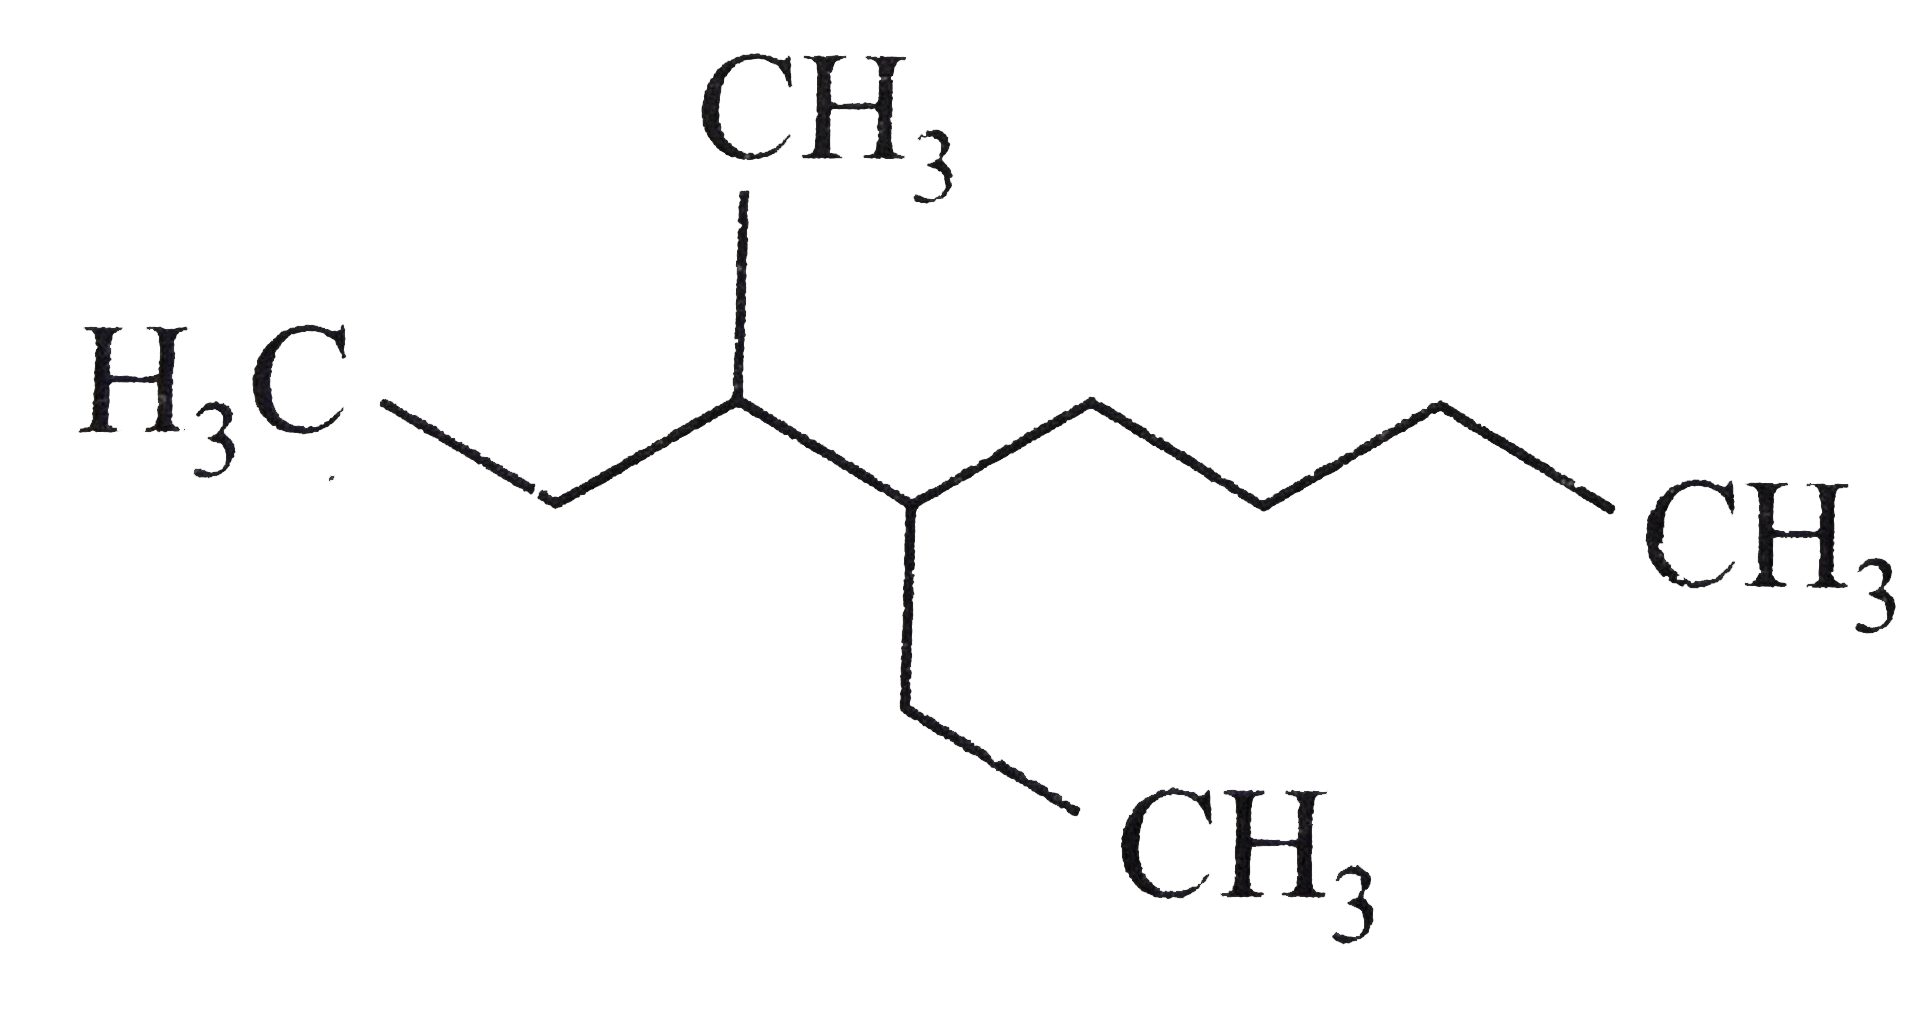 Name of the compound given below is